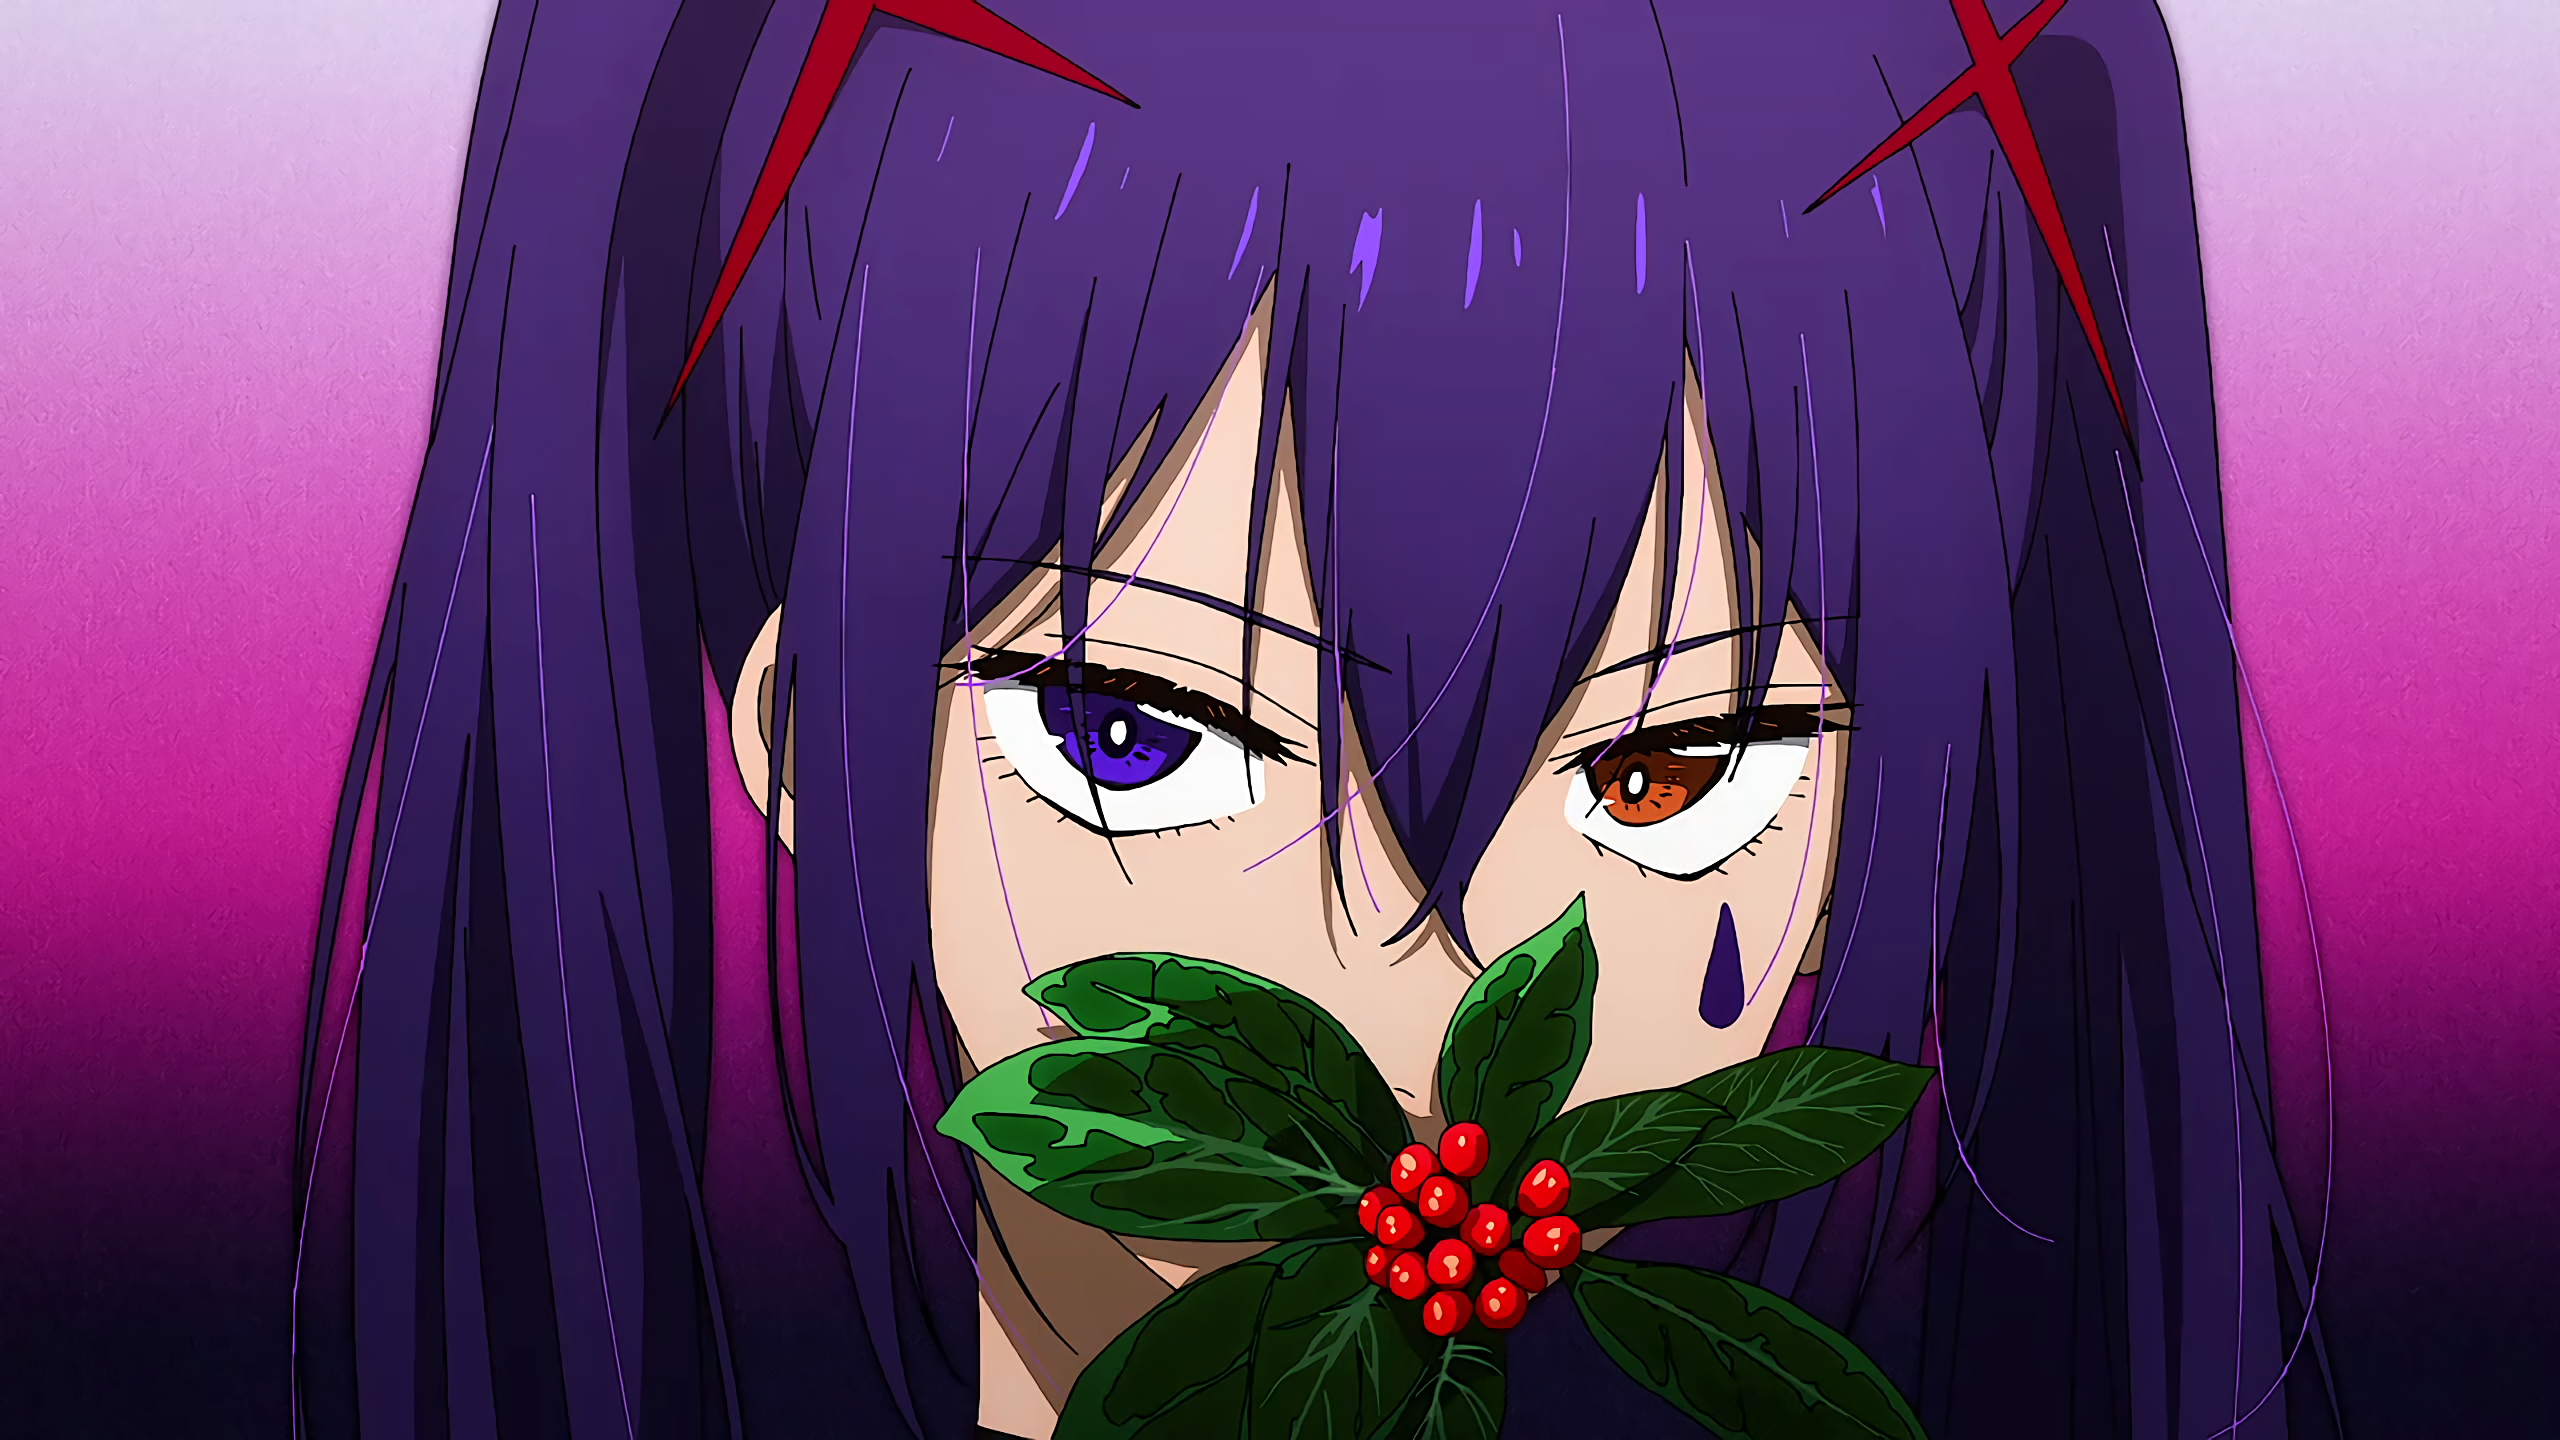 Mahou Shoujo Magical Destroyers Anime Girls Flowers Twintails Leaves Looking At Viewer Gradient Purp 2560x1440